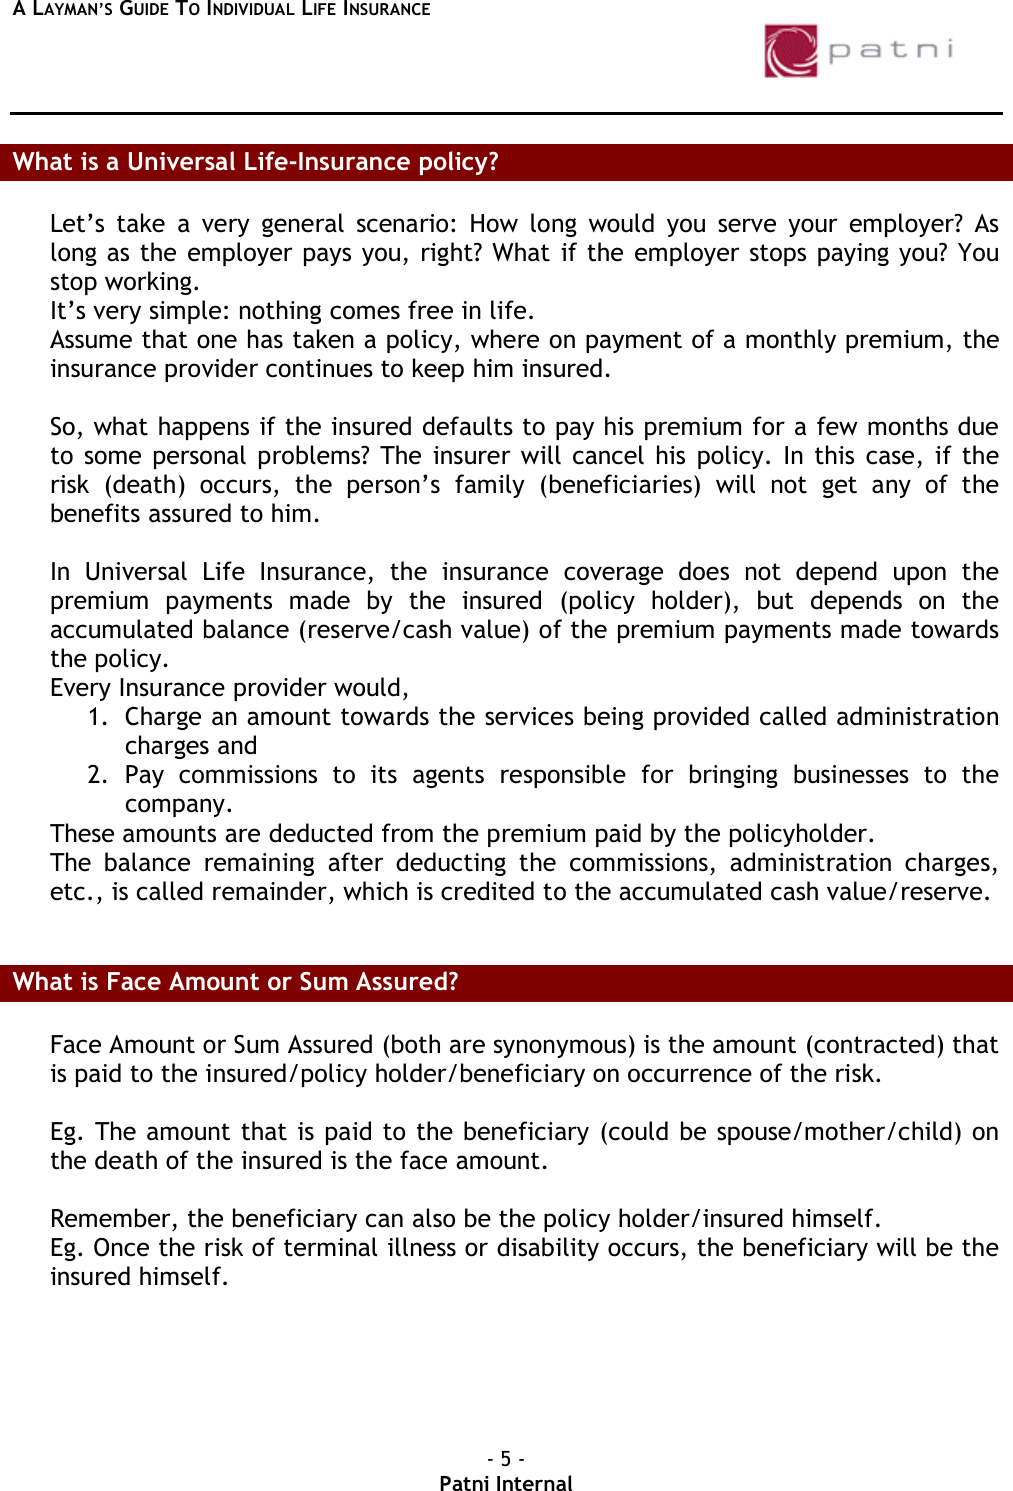 Page 5 of 11 - 45ADE867-21EA-28BEF3 A Laymans Guide To Individual Life-Insurance